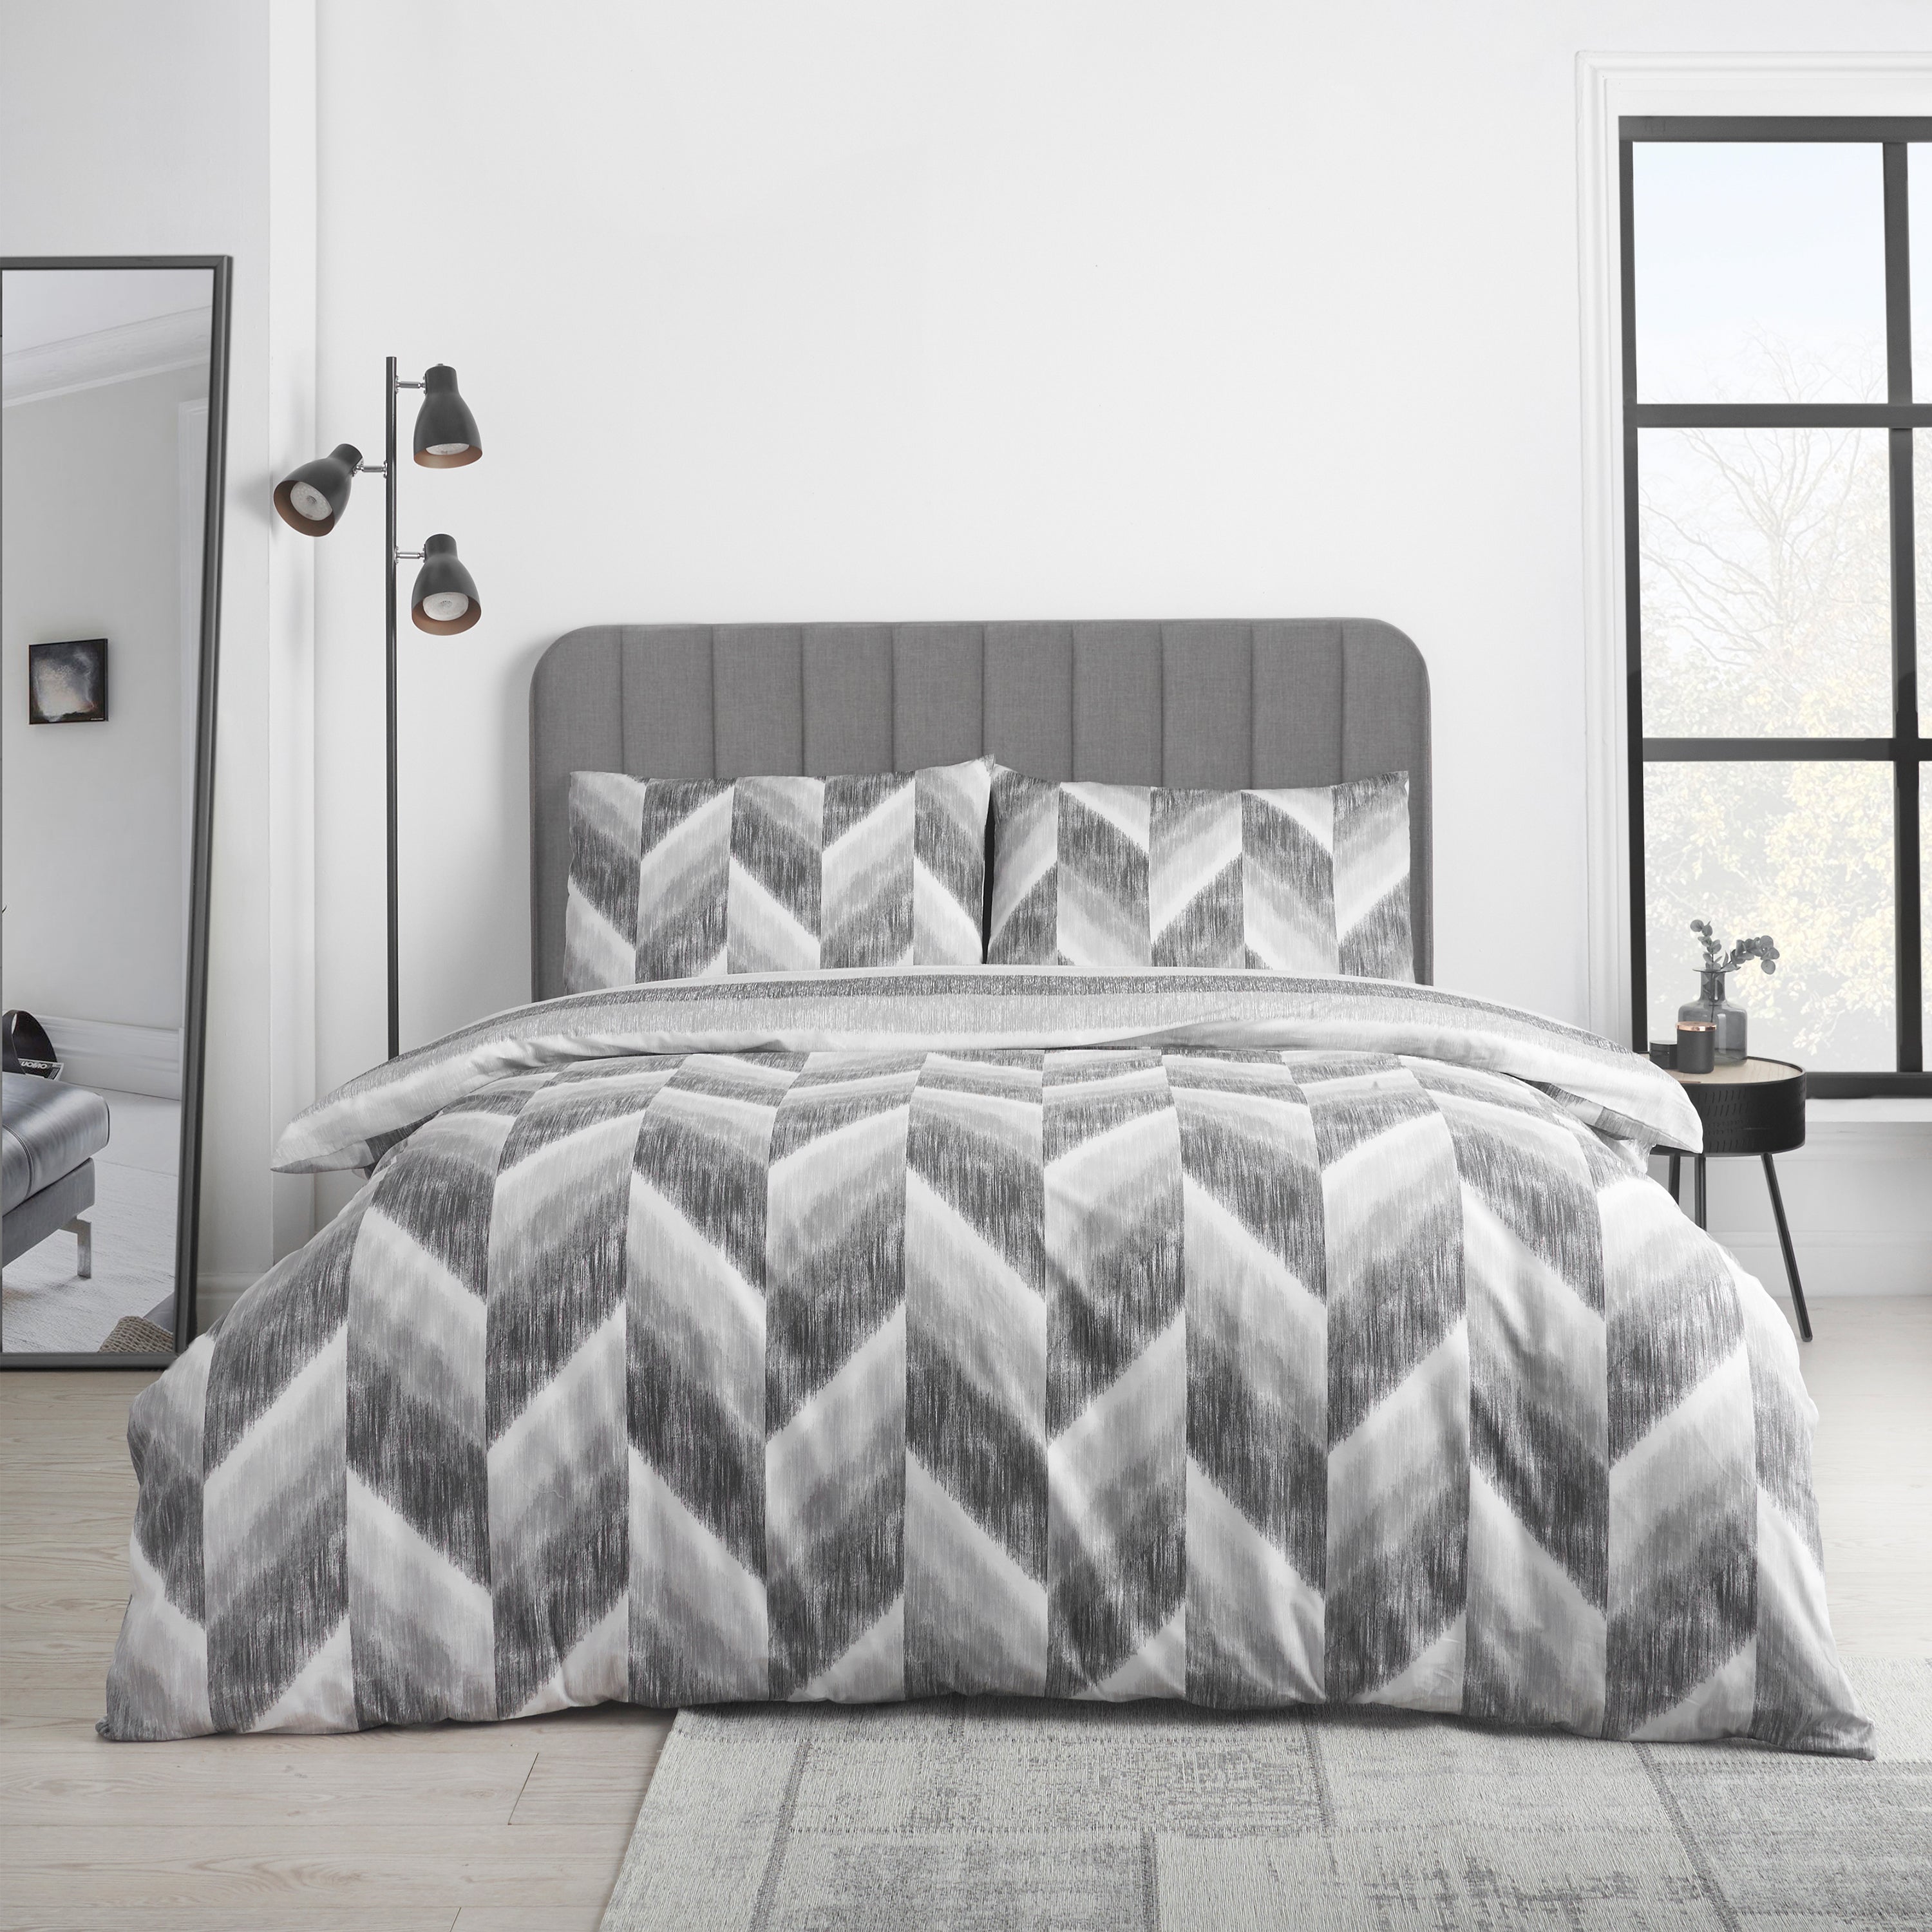 Photos - Bed Linen Catherine Lansfield Kamari Stripe Charcoal Grey Duvet Cover and Pillowcase 